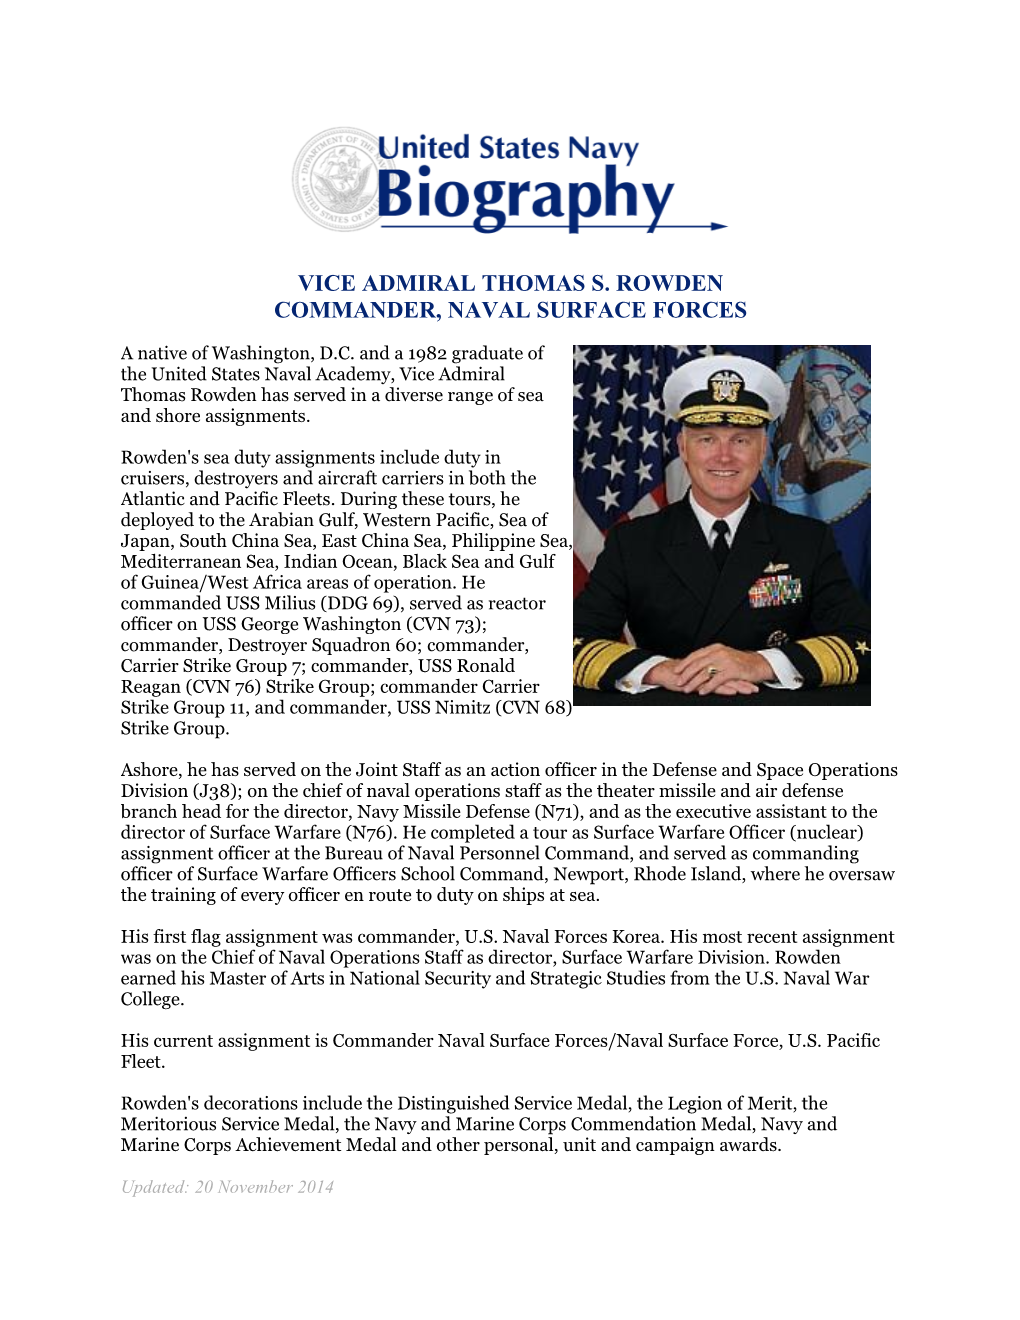 Vice Admiral Thomas S. Rowden Commander, Naval Surface Forces